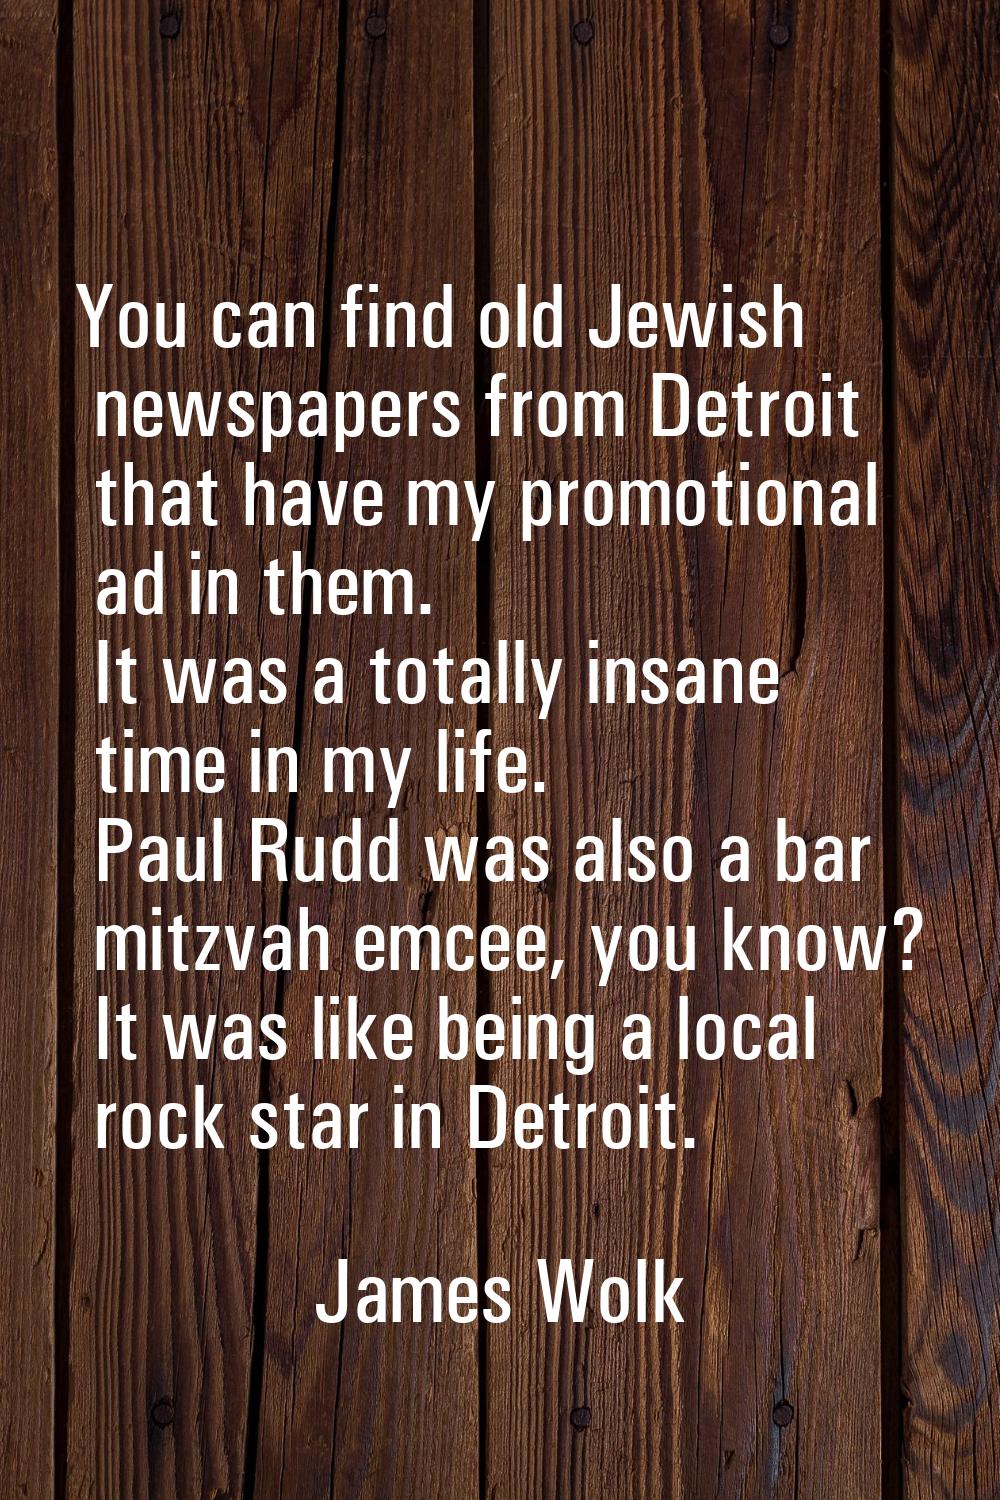 You can find old Jewish newspapers from Detroit that have my promotional ad in them. It was a total